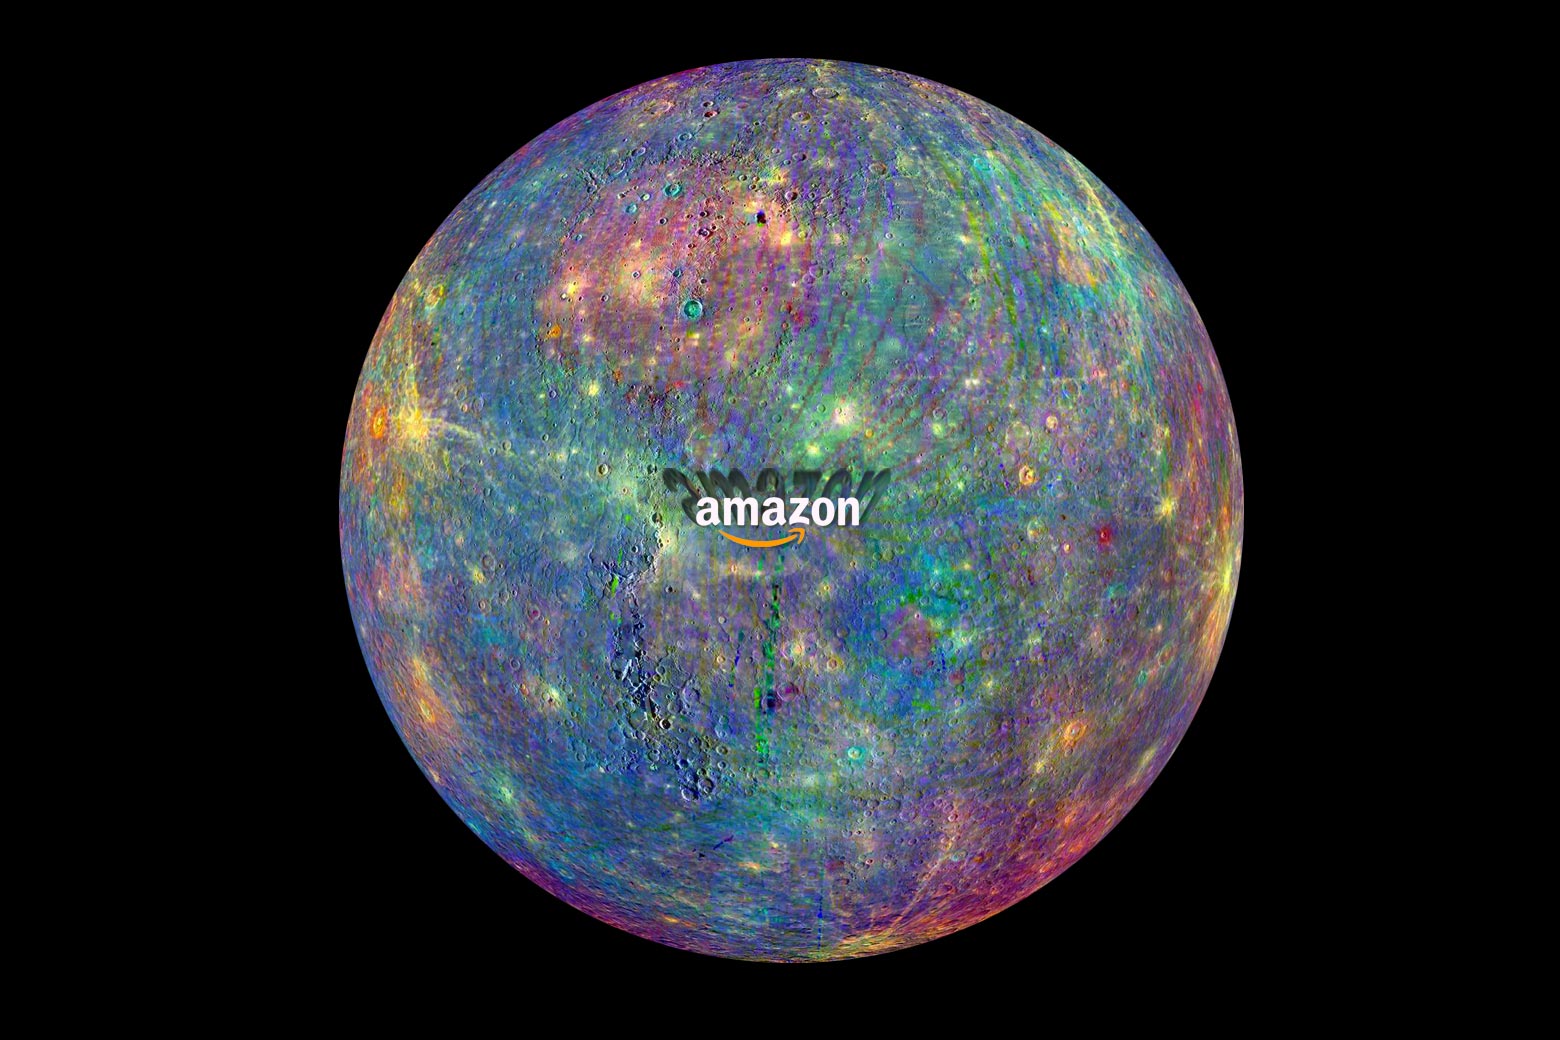 A view of Mercury with the Amazon logo over it. 